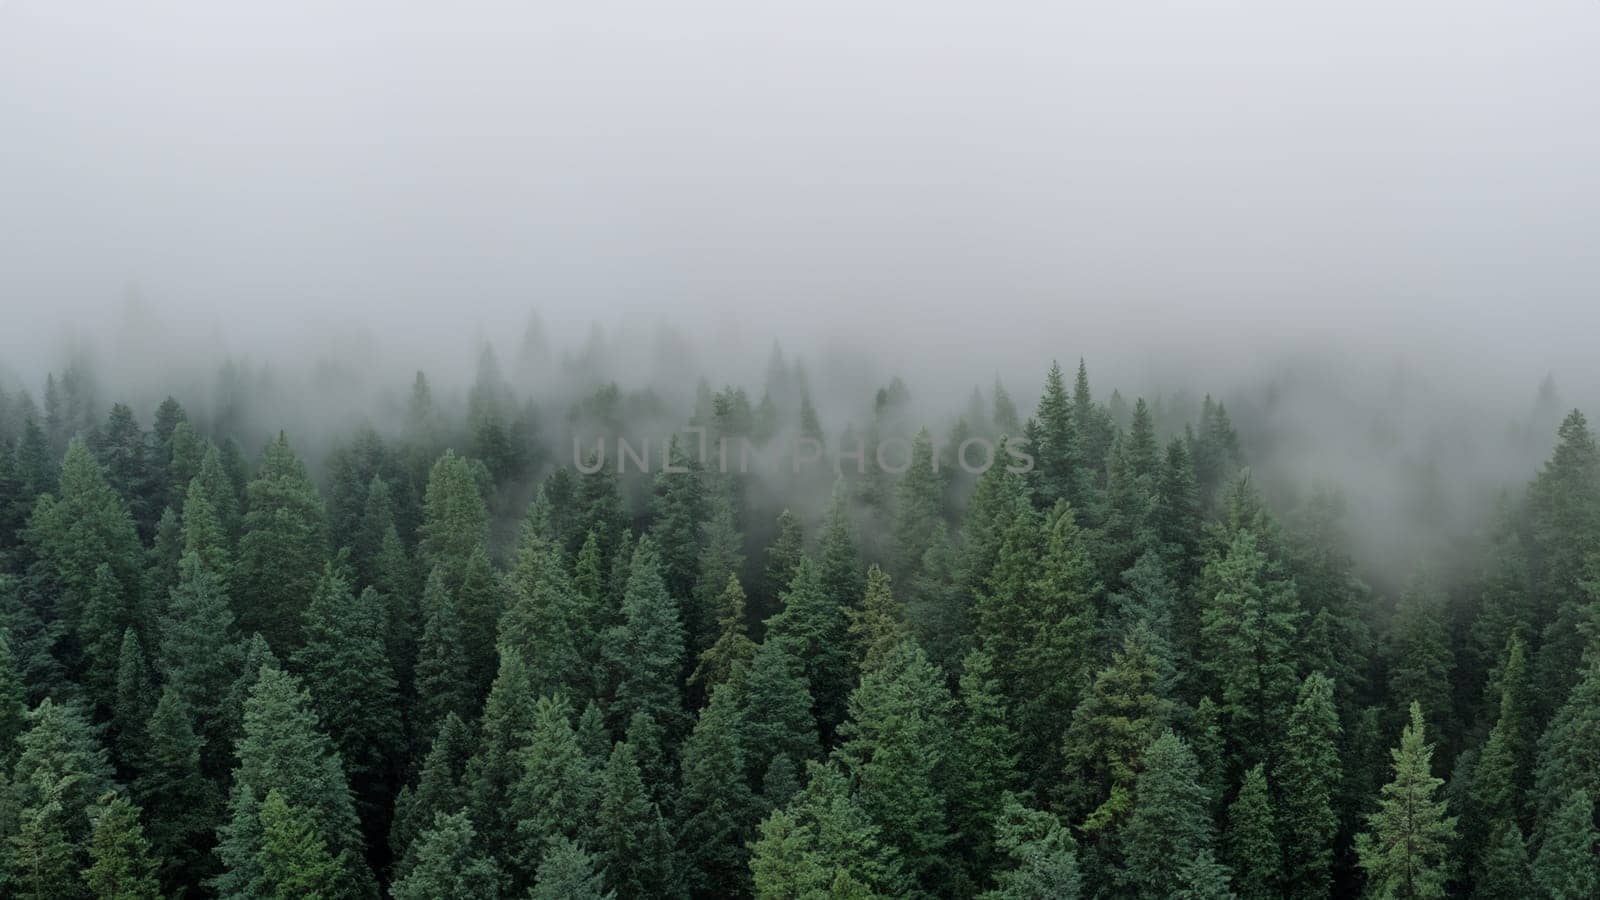 Foggy Evergreen Forest in Pacific Northwest